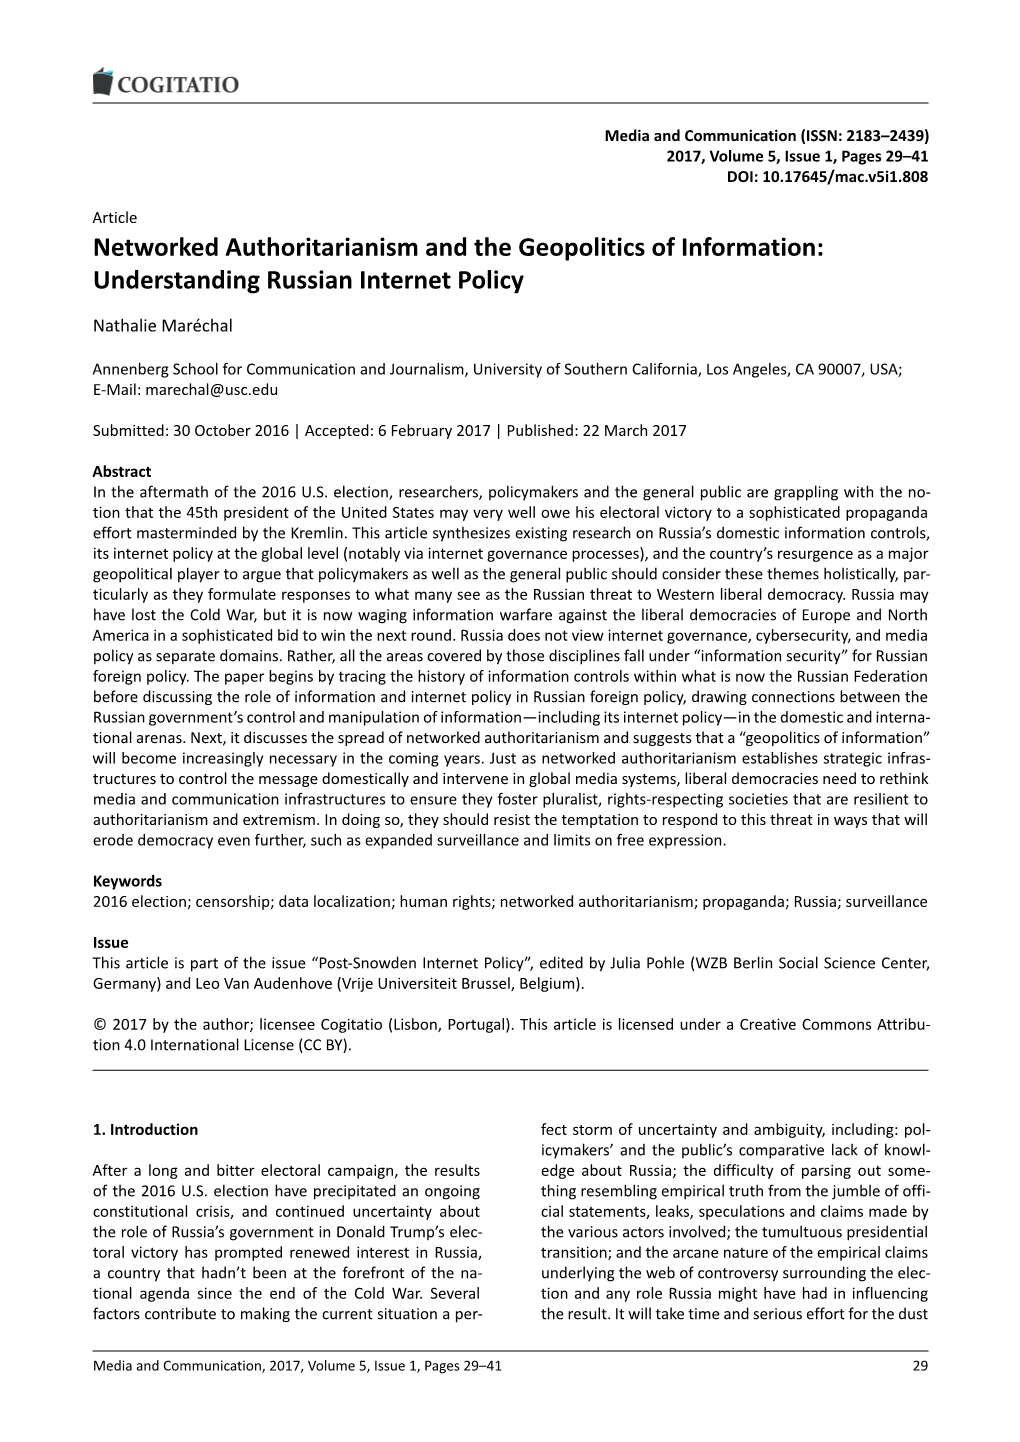 Networked Authoritarianism and the Geopolitics of Information: Understanding Russian Internet Policy